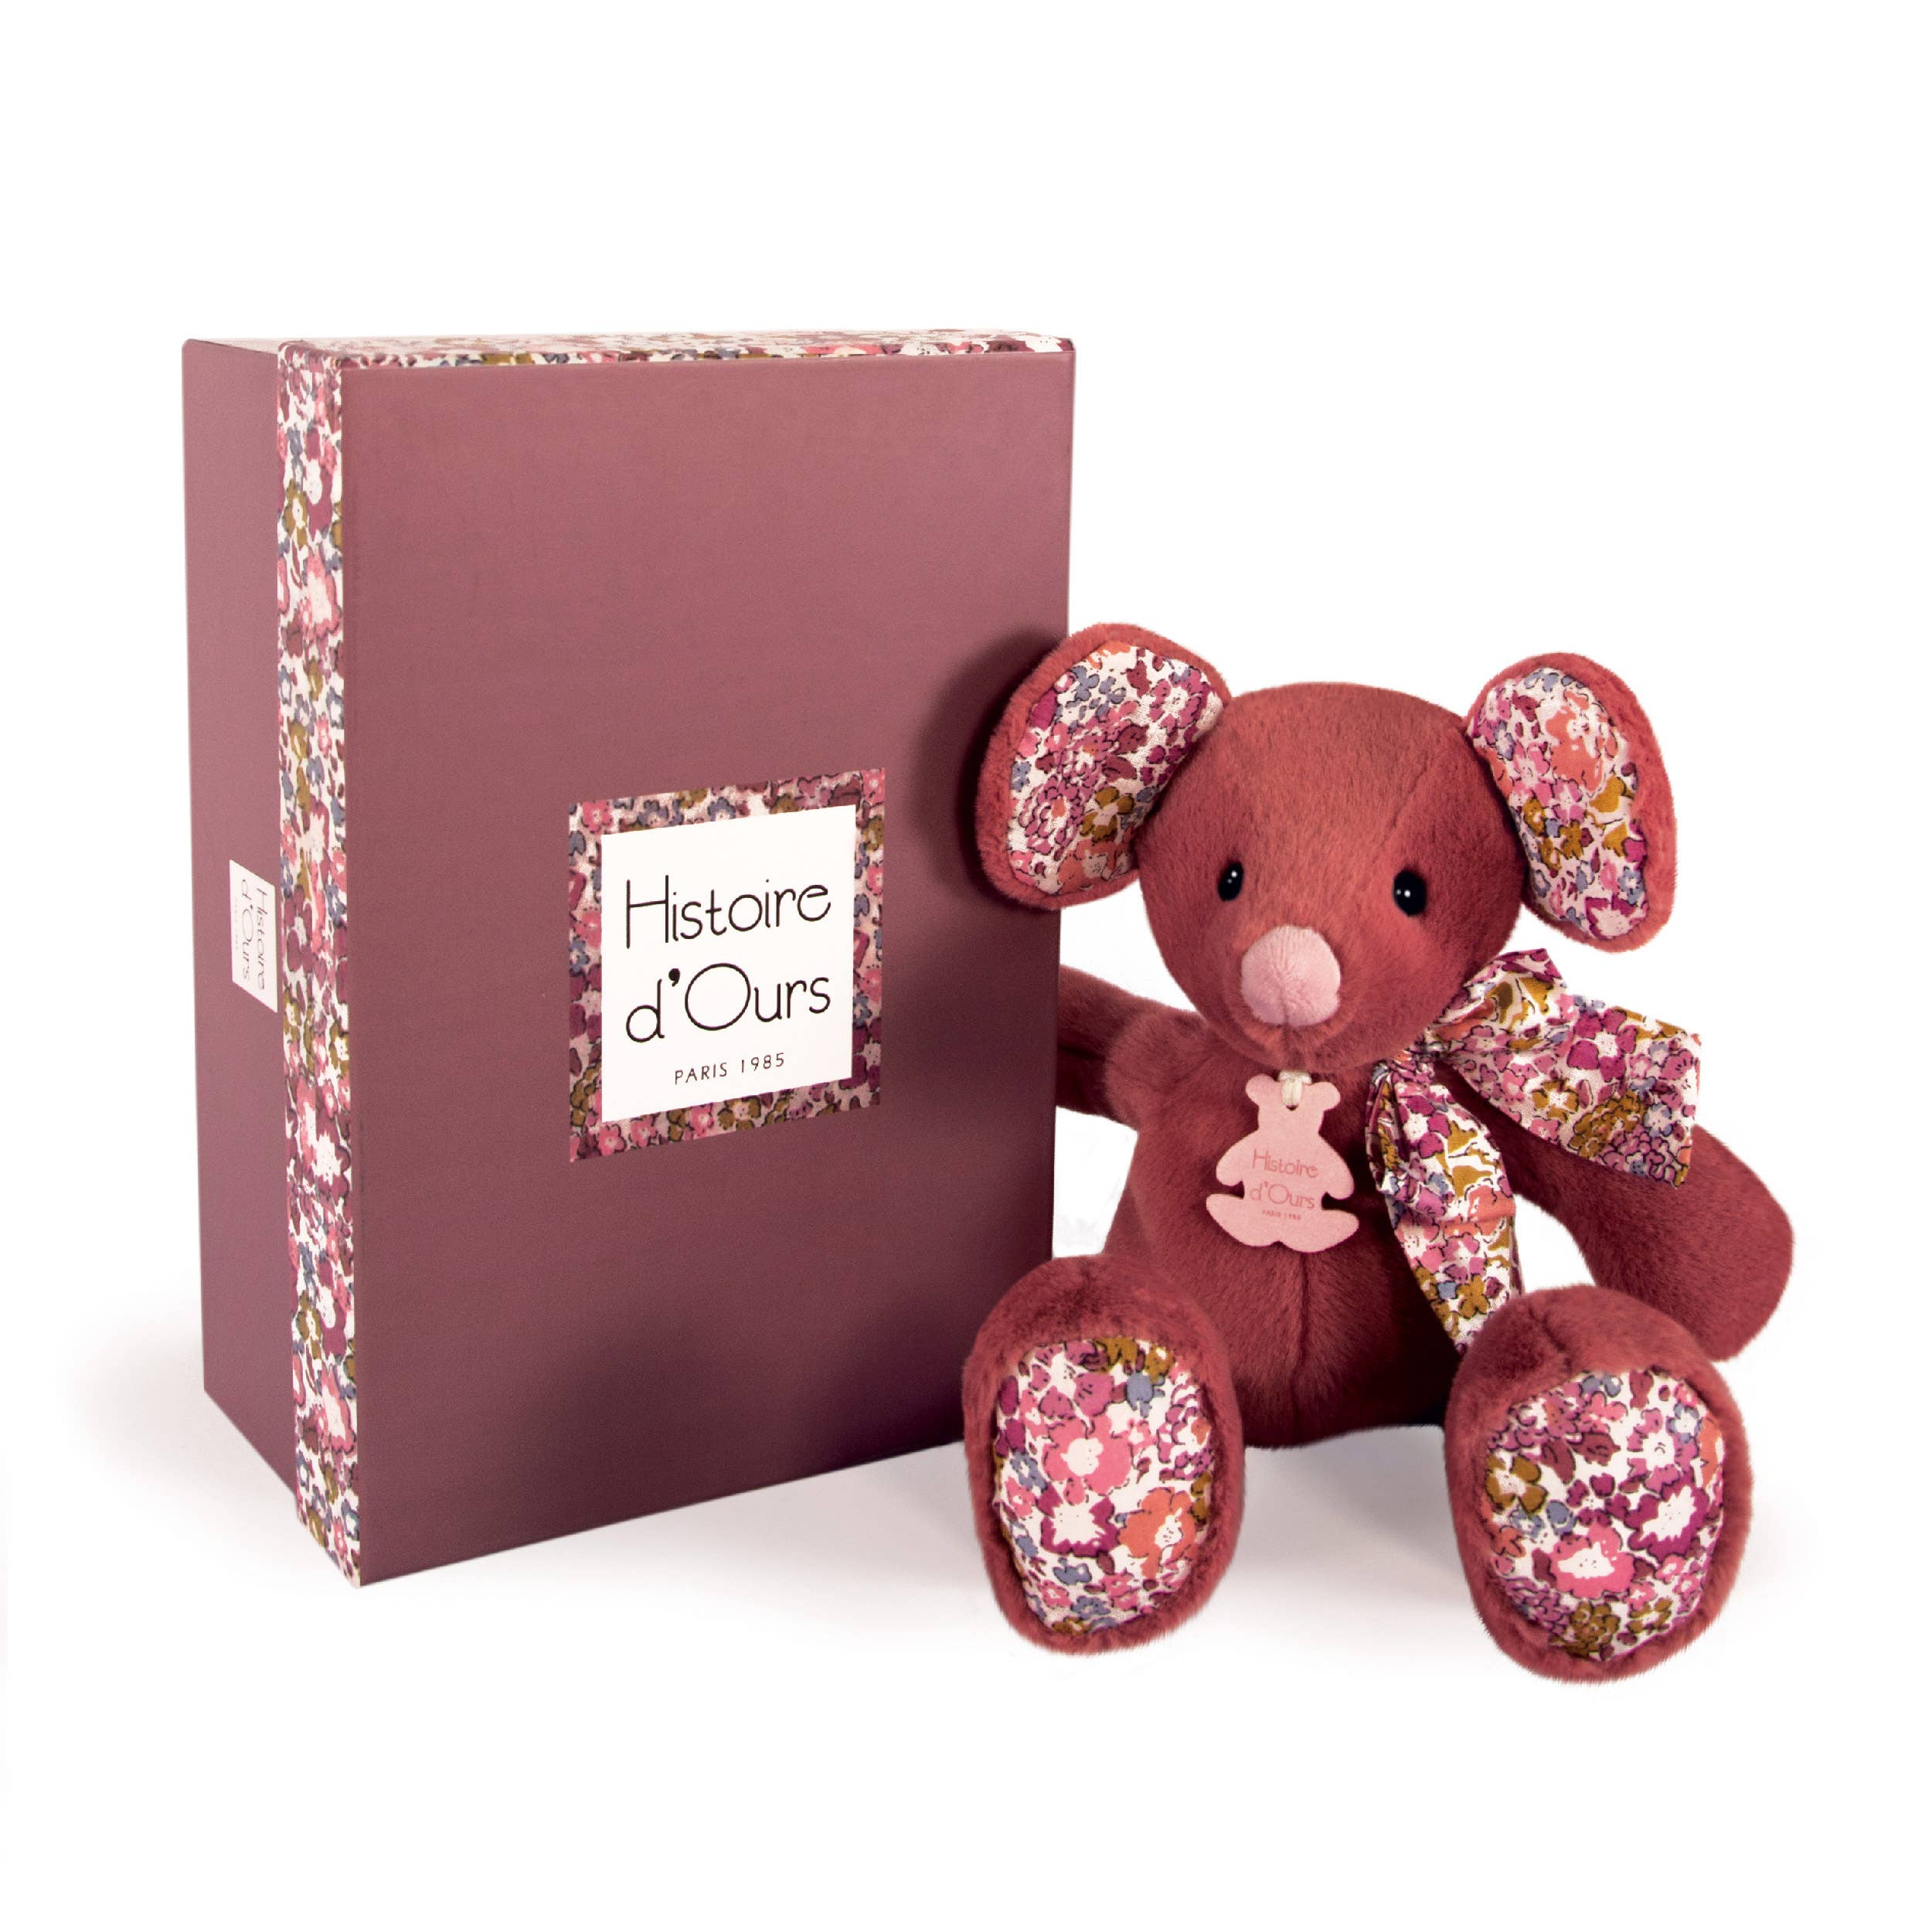 Terracotta mouse toy with floral patterns in a decorative box